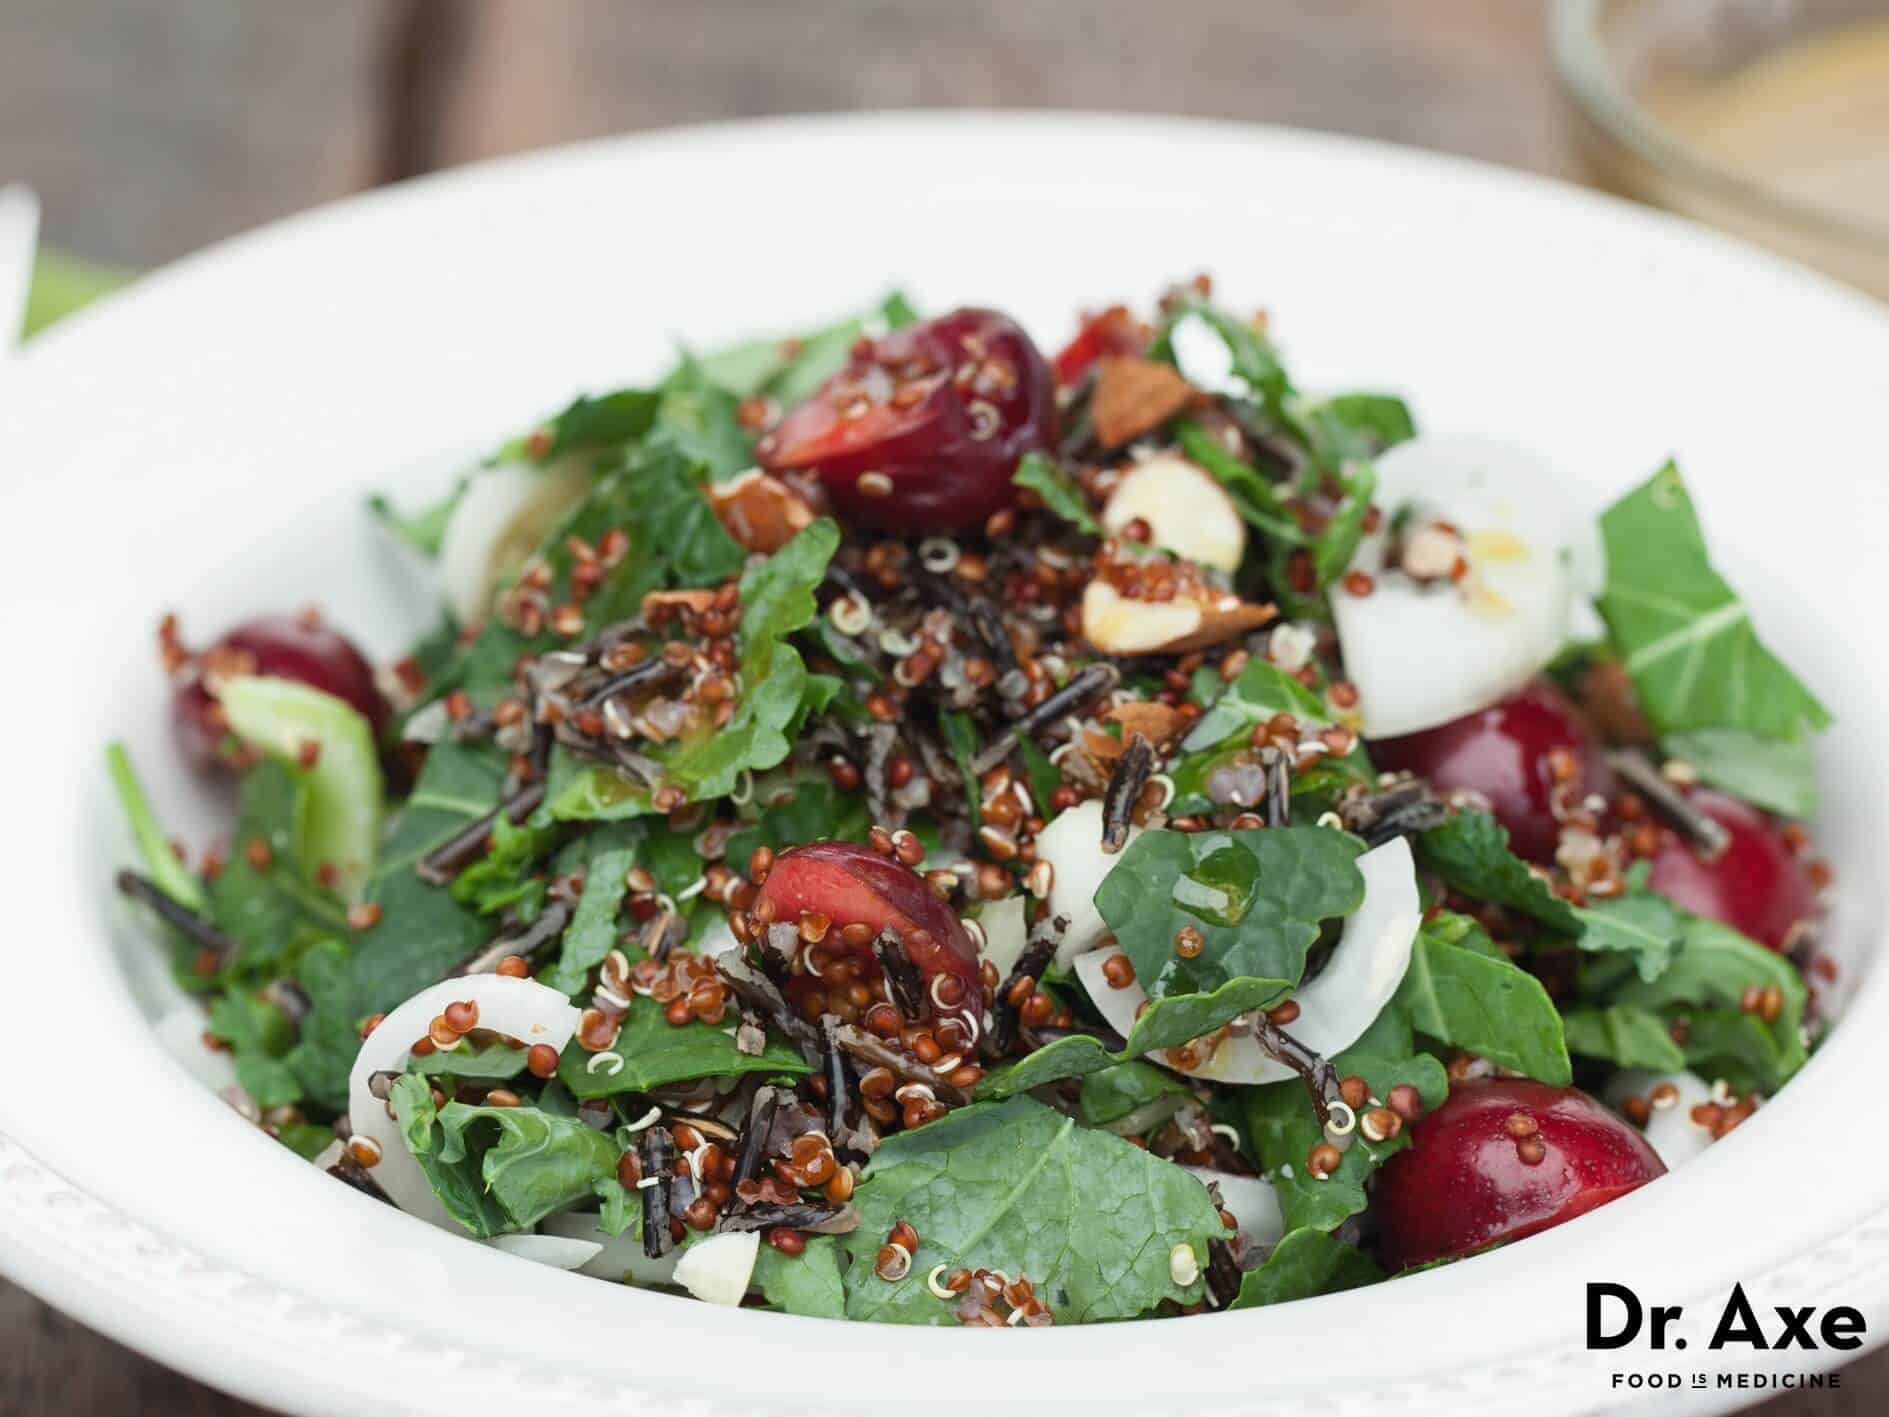 Quinoa salad with dark cherries and kale recipe - Dr. Axe